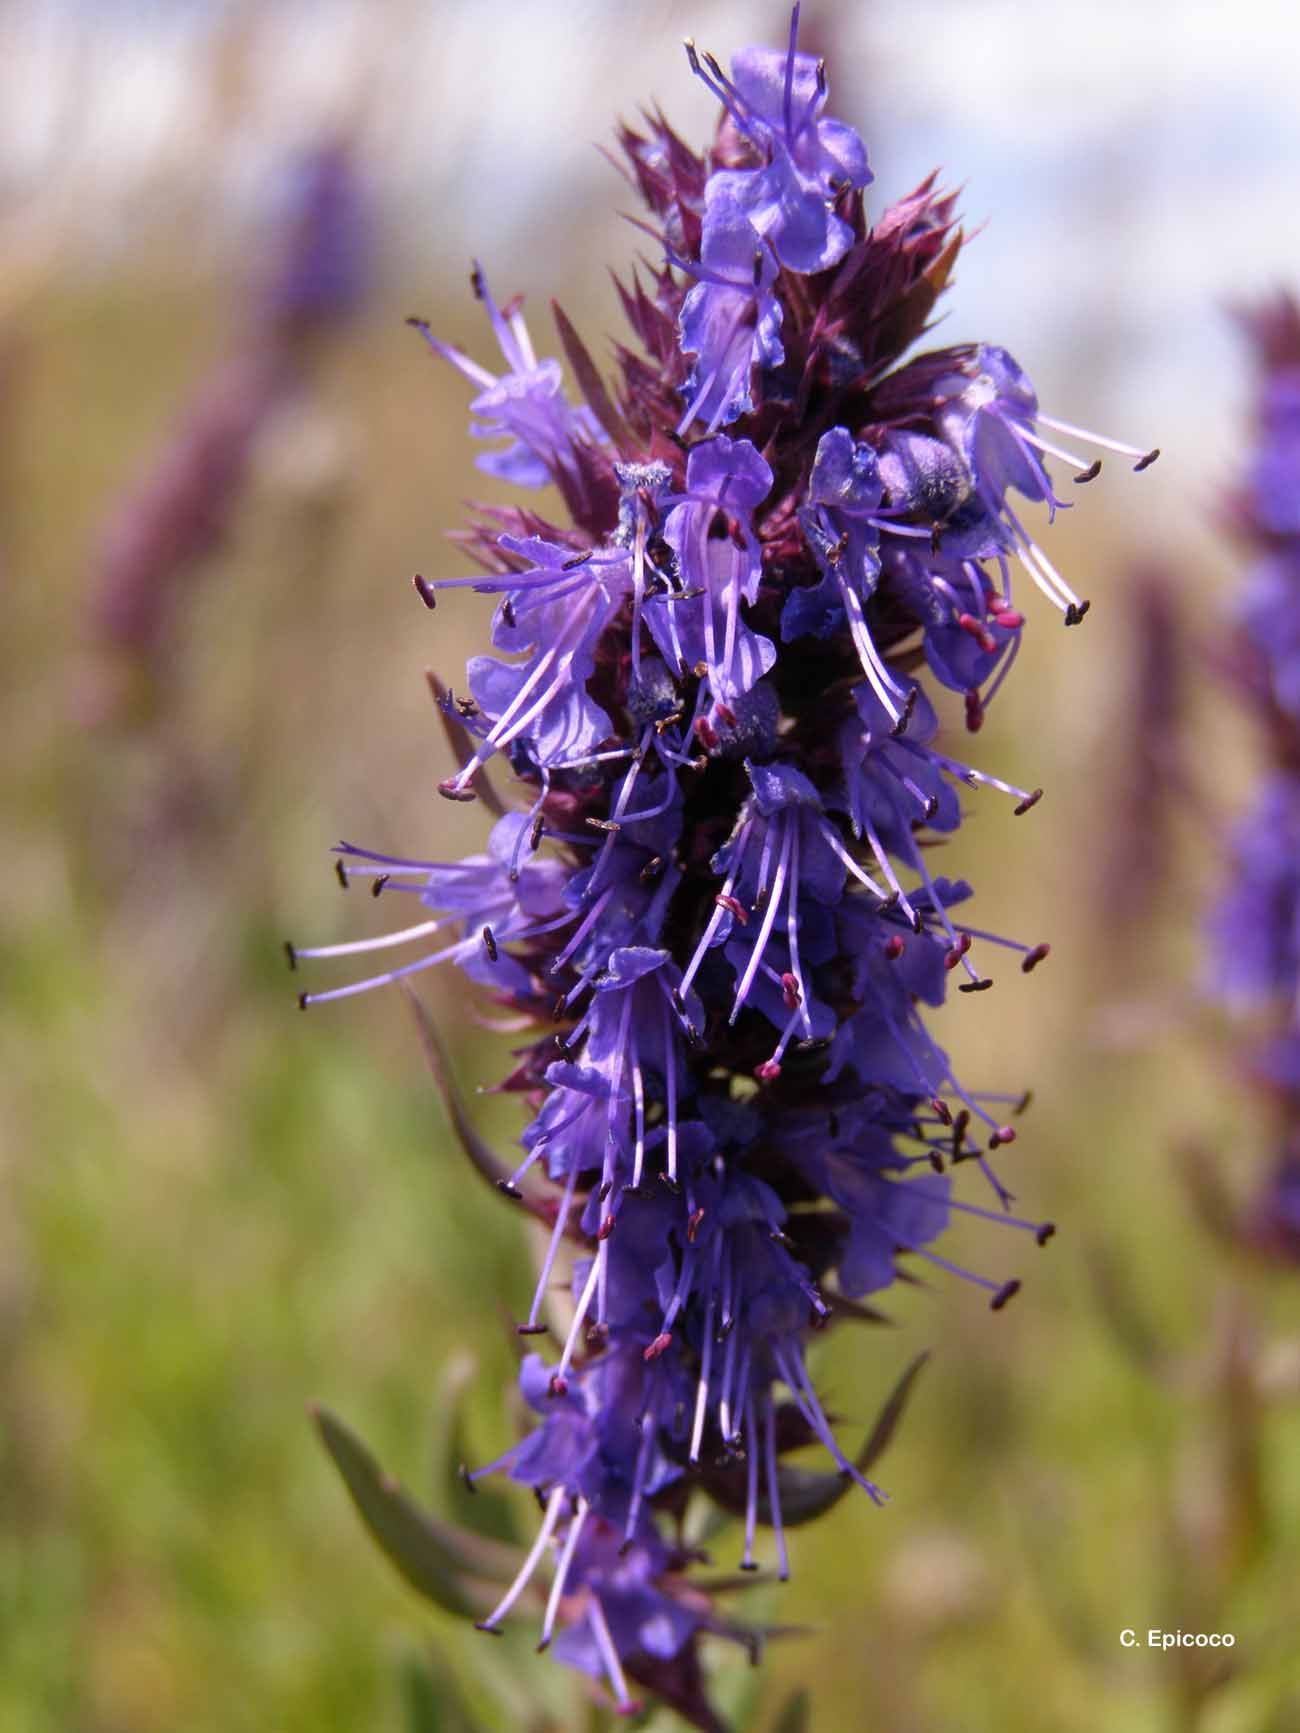 Image of hyssop